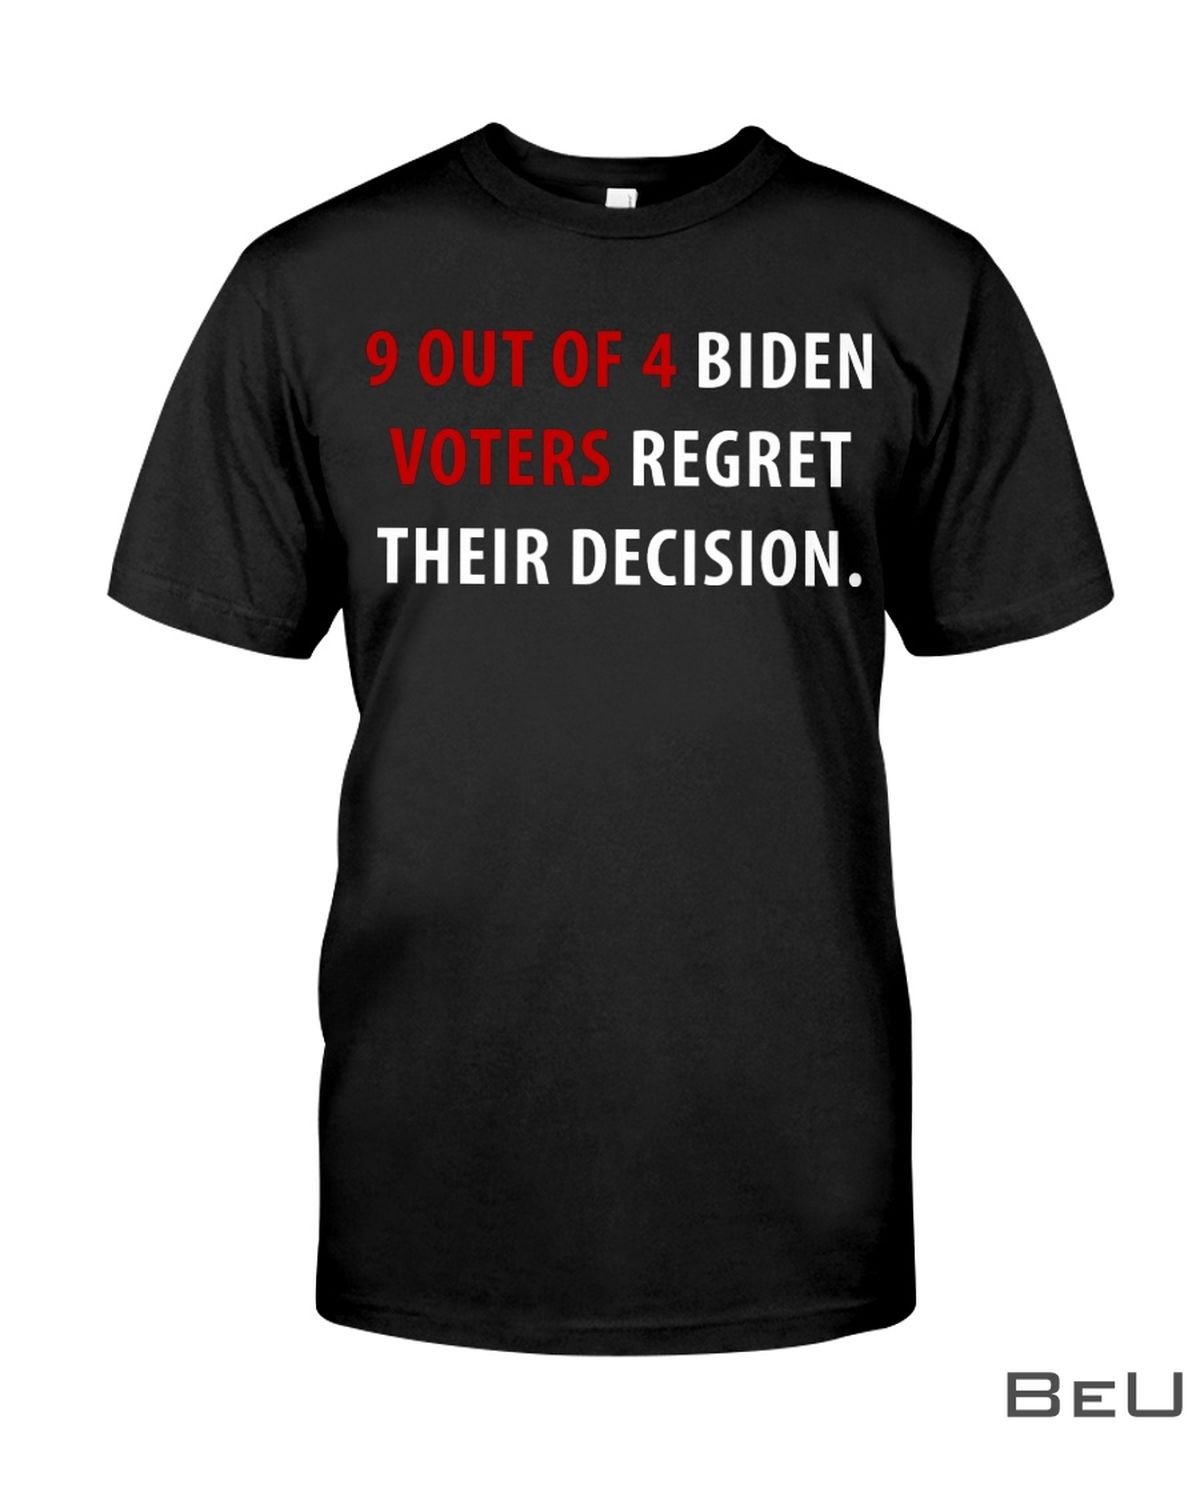 9-Out-Of-4-Biden-Voters-Regret-Their-Decision-Shirt